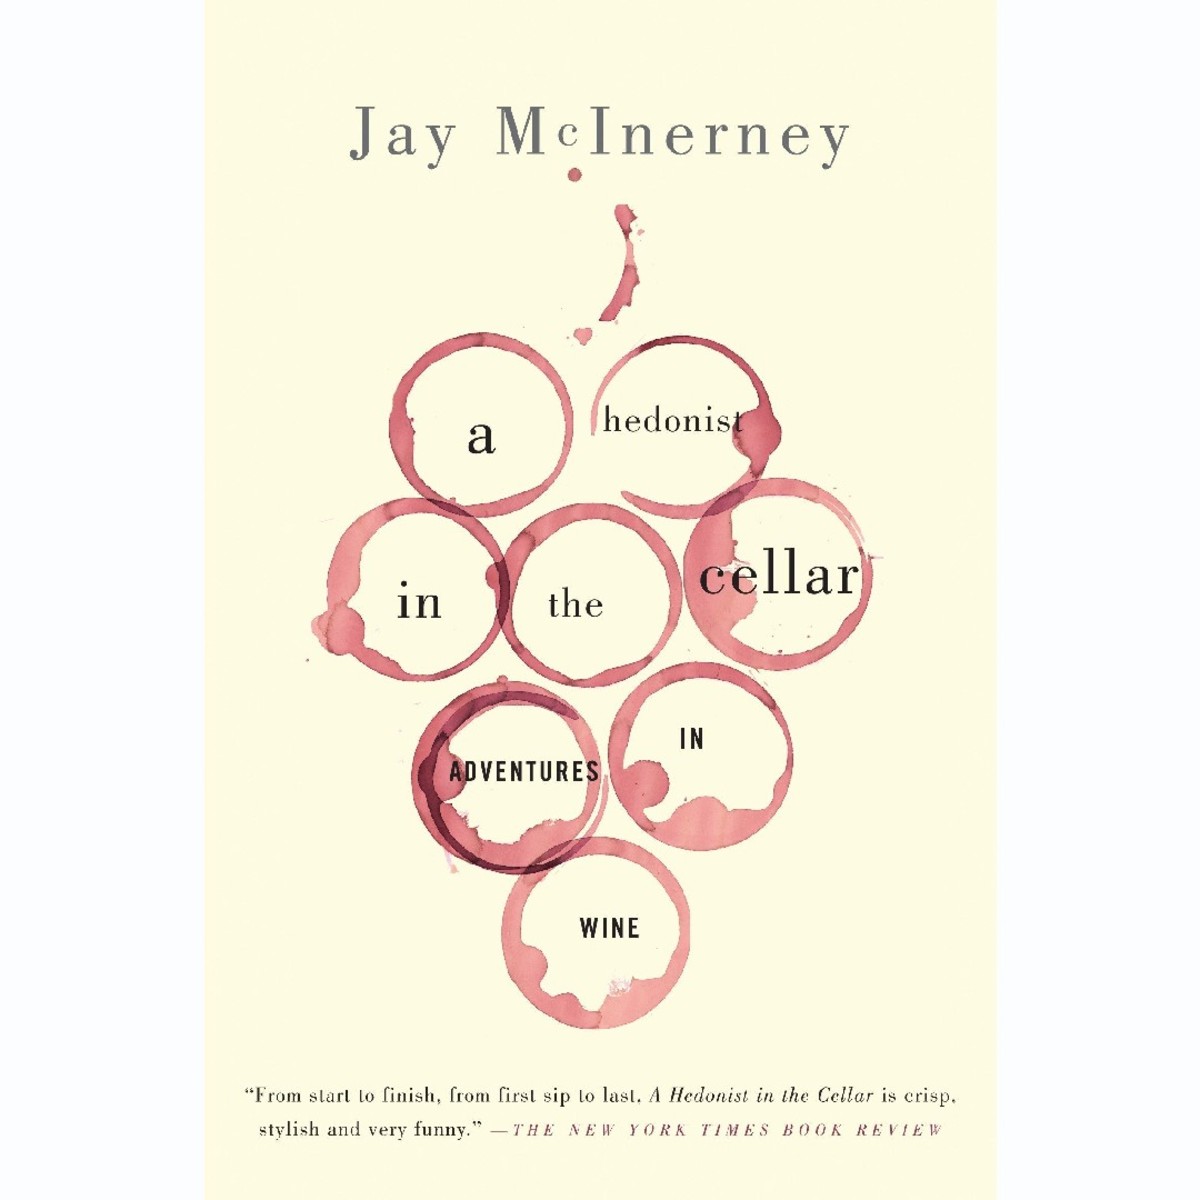 'A Hedonist in the Cellar: Adventures in Wine' by Jay McInerney